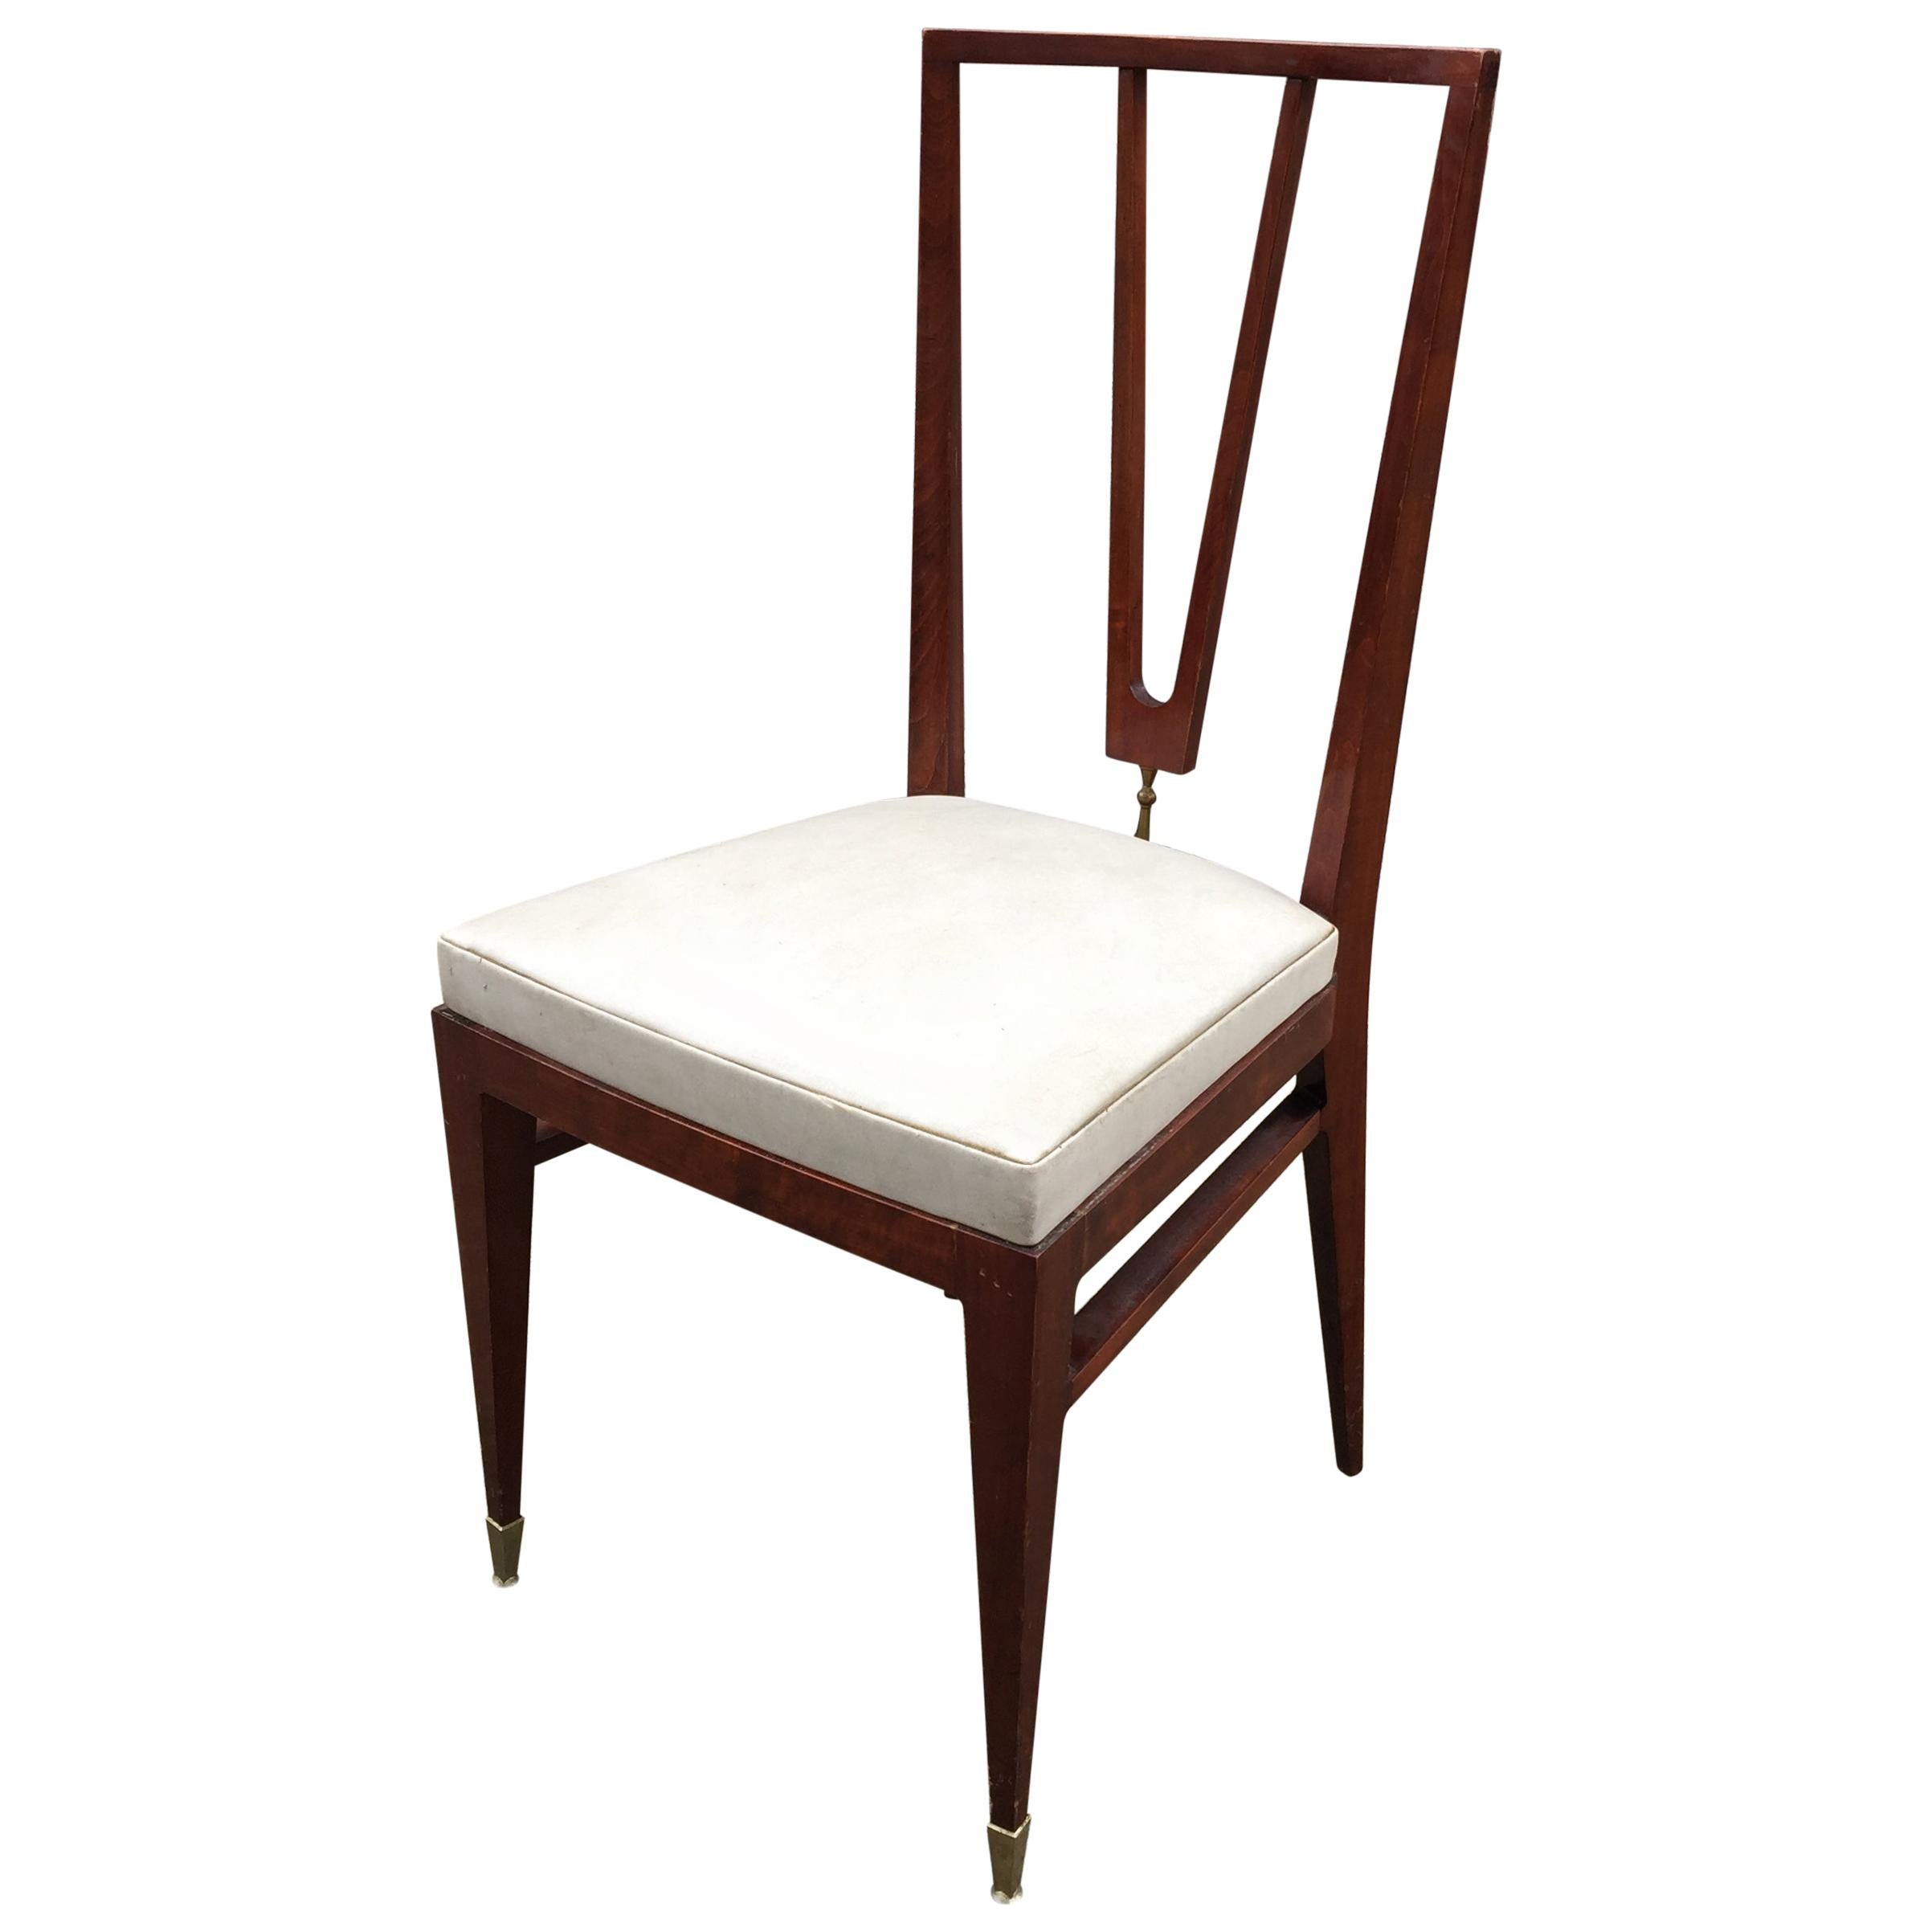 Elegant Chair in Stained Beech and Brass, France or Italy, circa 1940